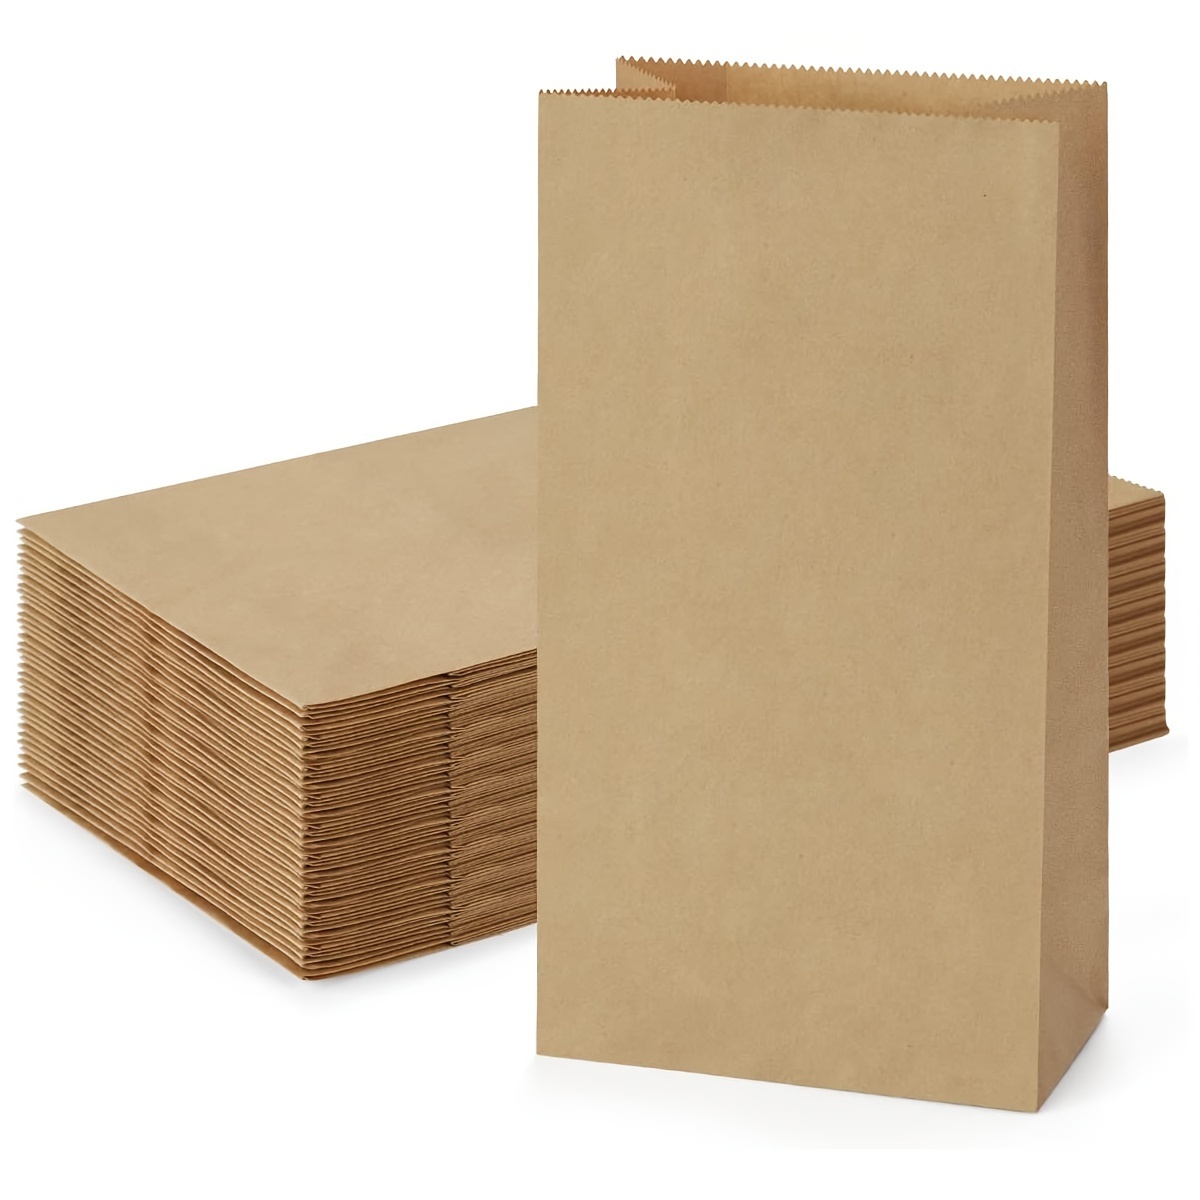 

50pcs, Brown Kraft Paper Bags 6x11 Inch (about 15.5 X 30 Cm) Flat Envelope Merchandise Bags For Party Gift Snack Bags